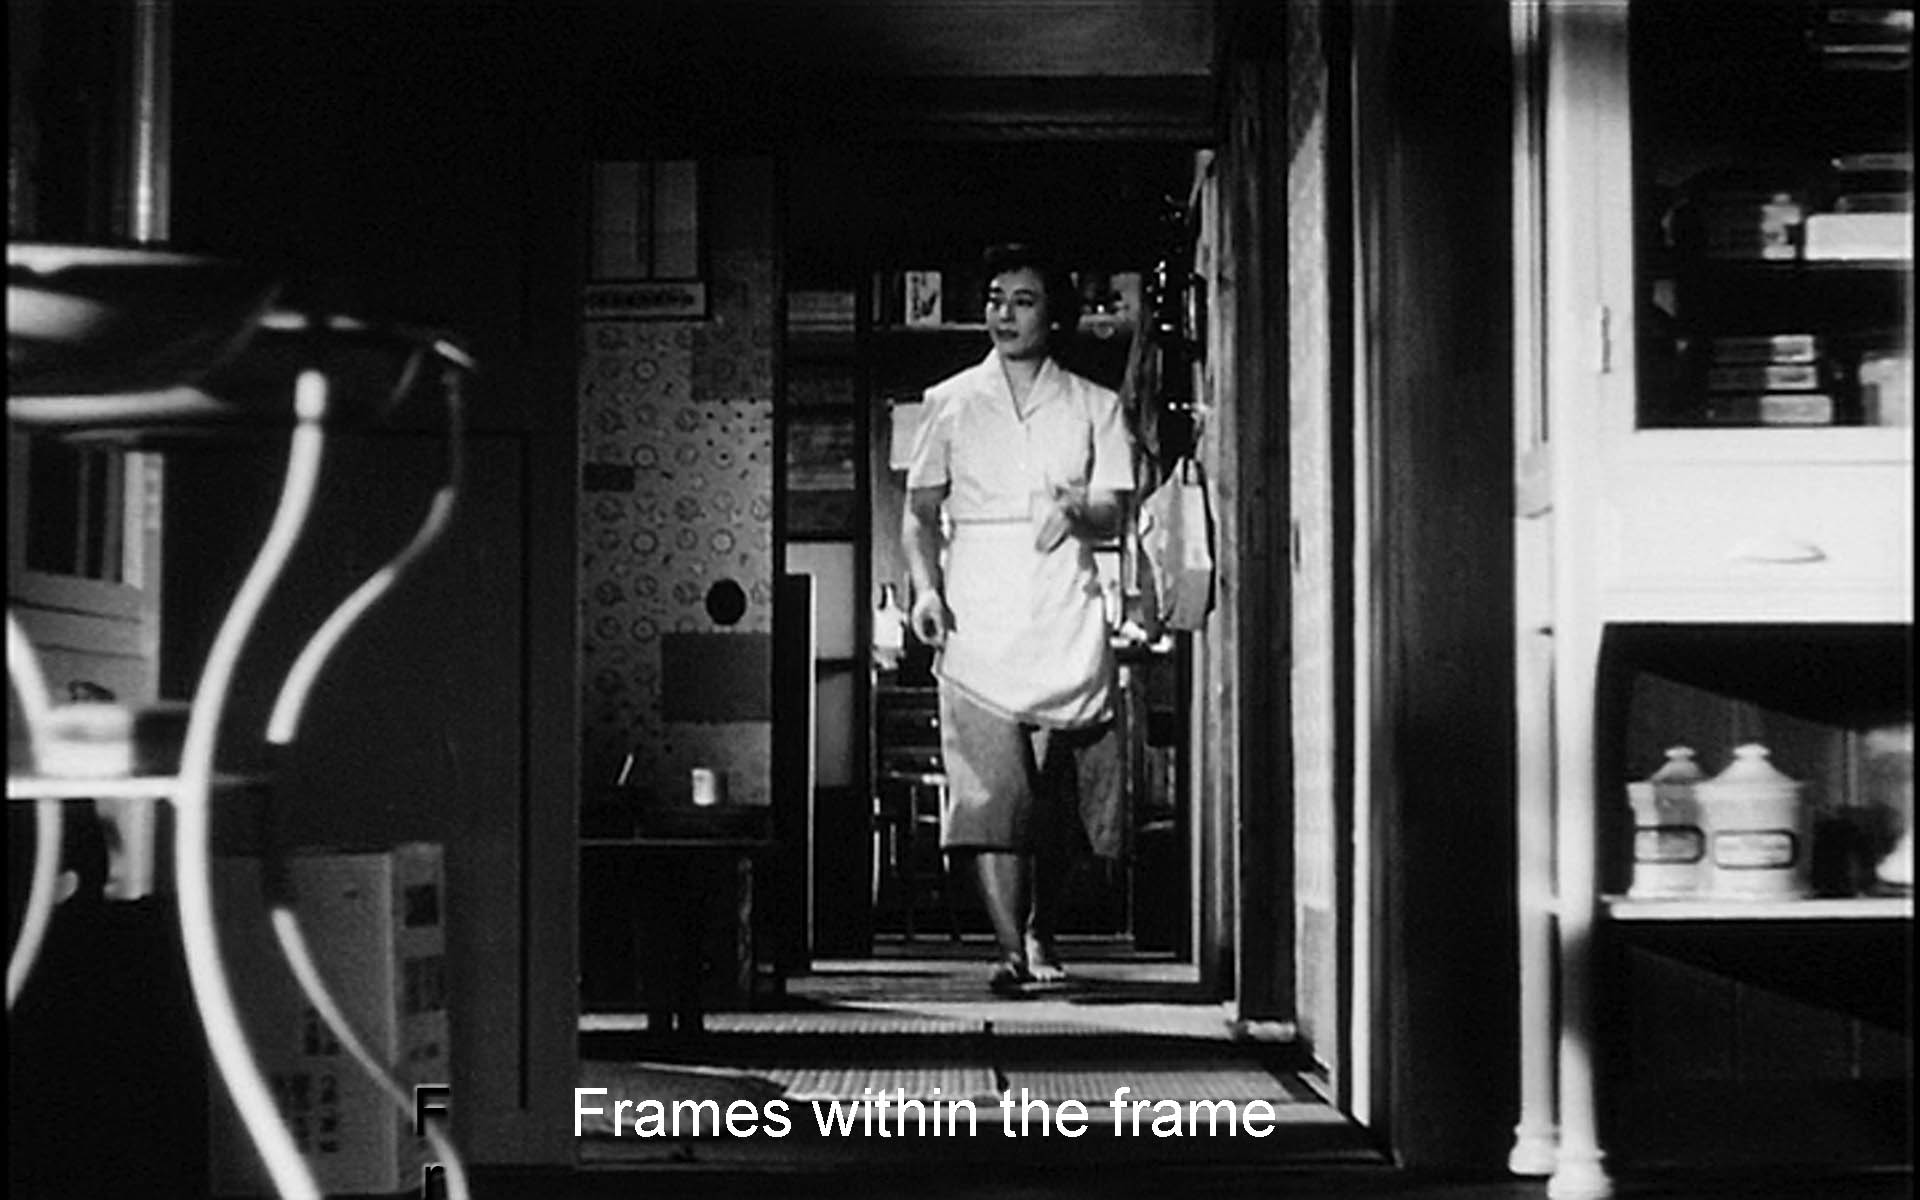 Frames within the frame